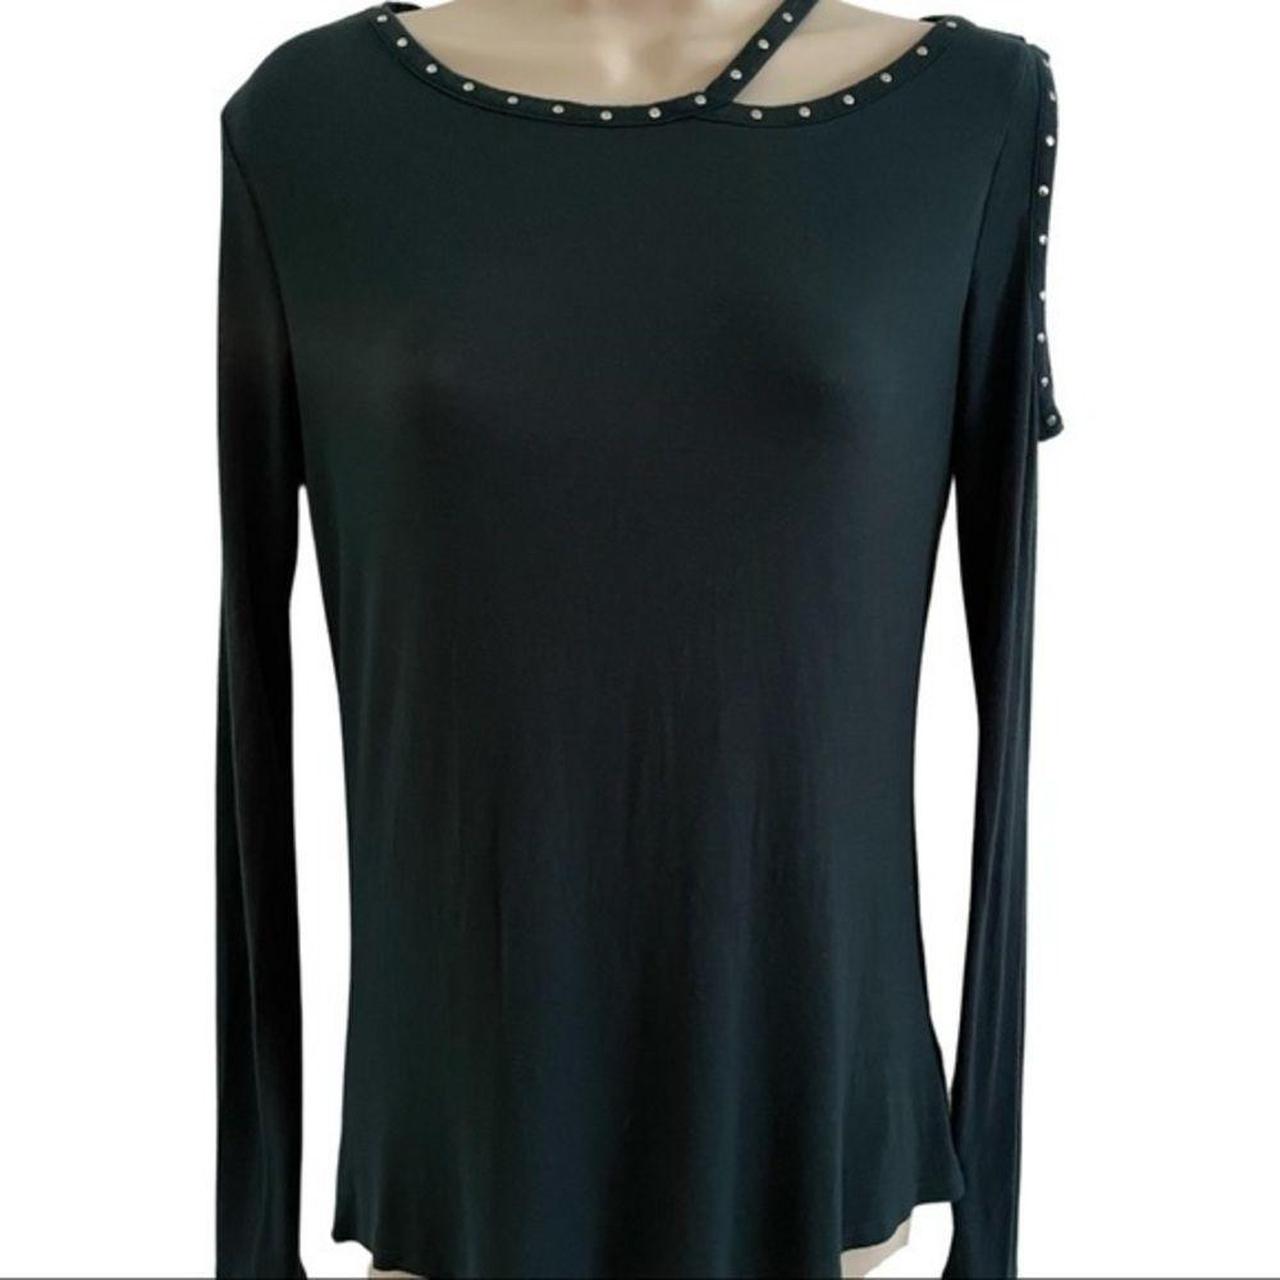 Product Image 1 - Rock and Republic Top. Off